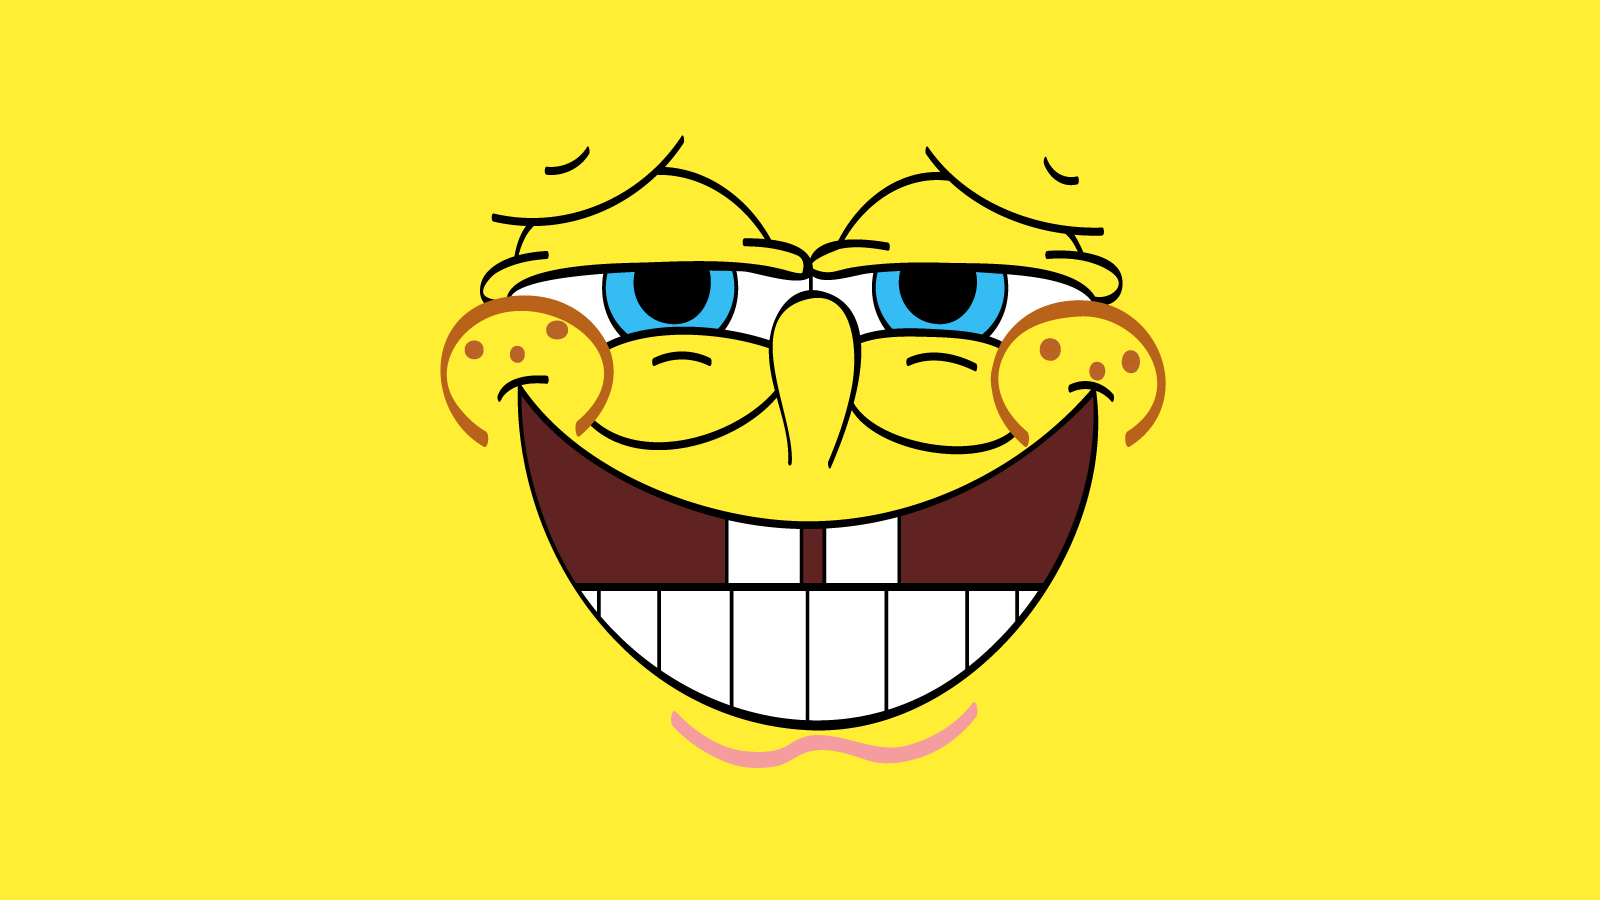 Download Free Hd Wallpapers Of Spongebob Squarepants In High Resolution And High Quality. Also Funny Pictures Of Spongebob, Spongebob Images, Hdpng.com  - Funny, Transparent background PNG HD thumbnail